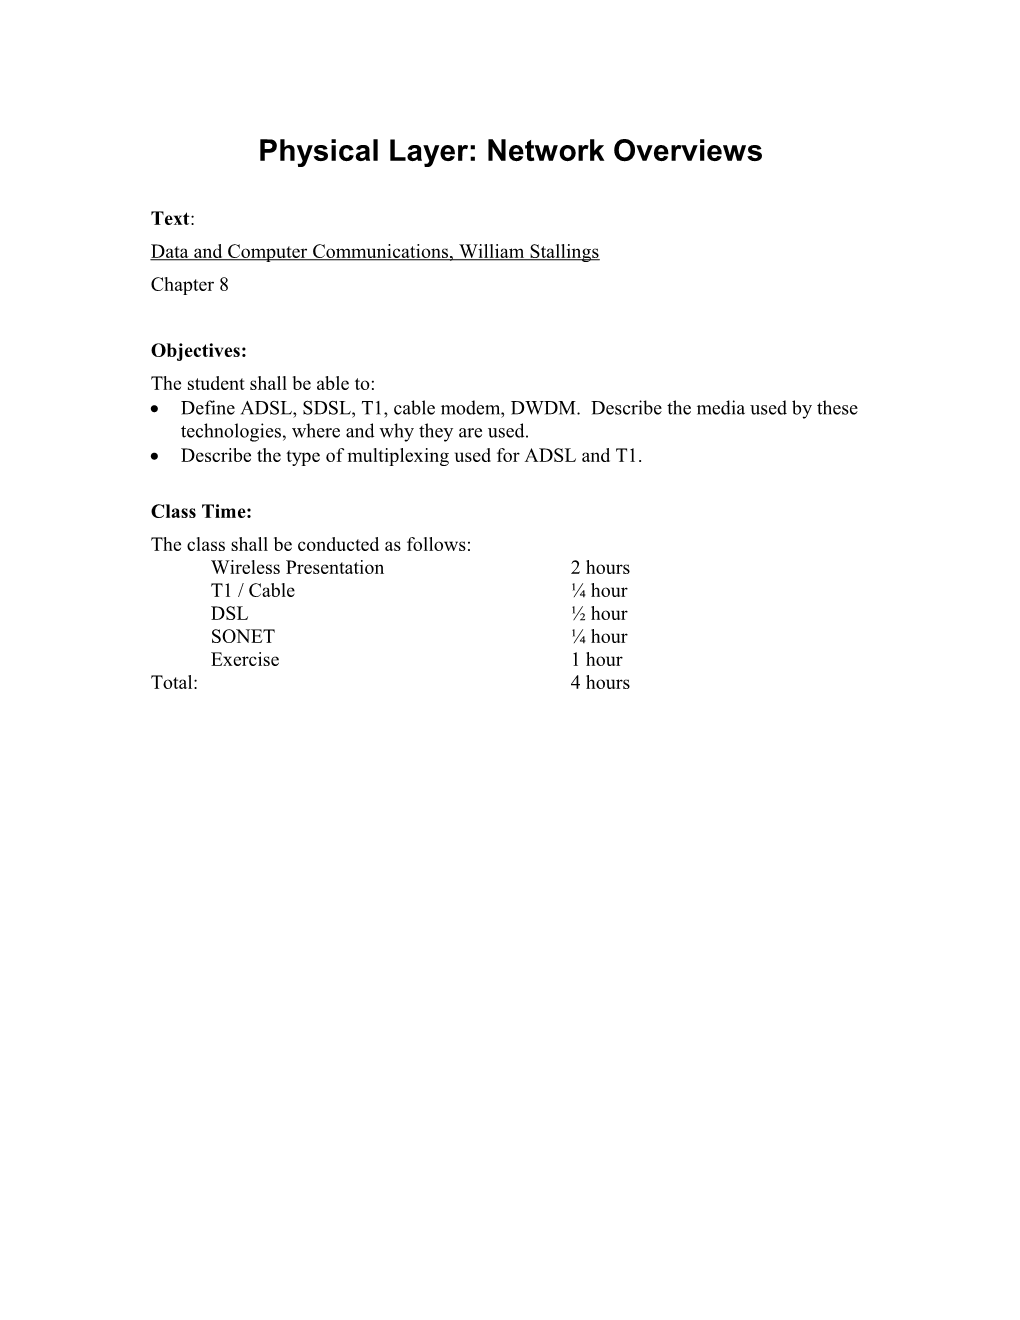 Physical Layer: Network Overviews